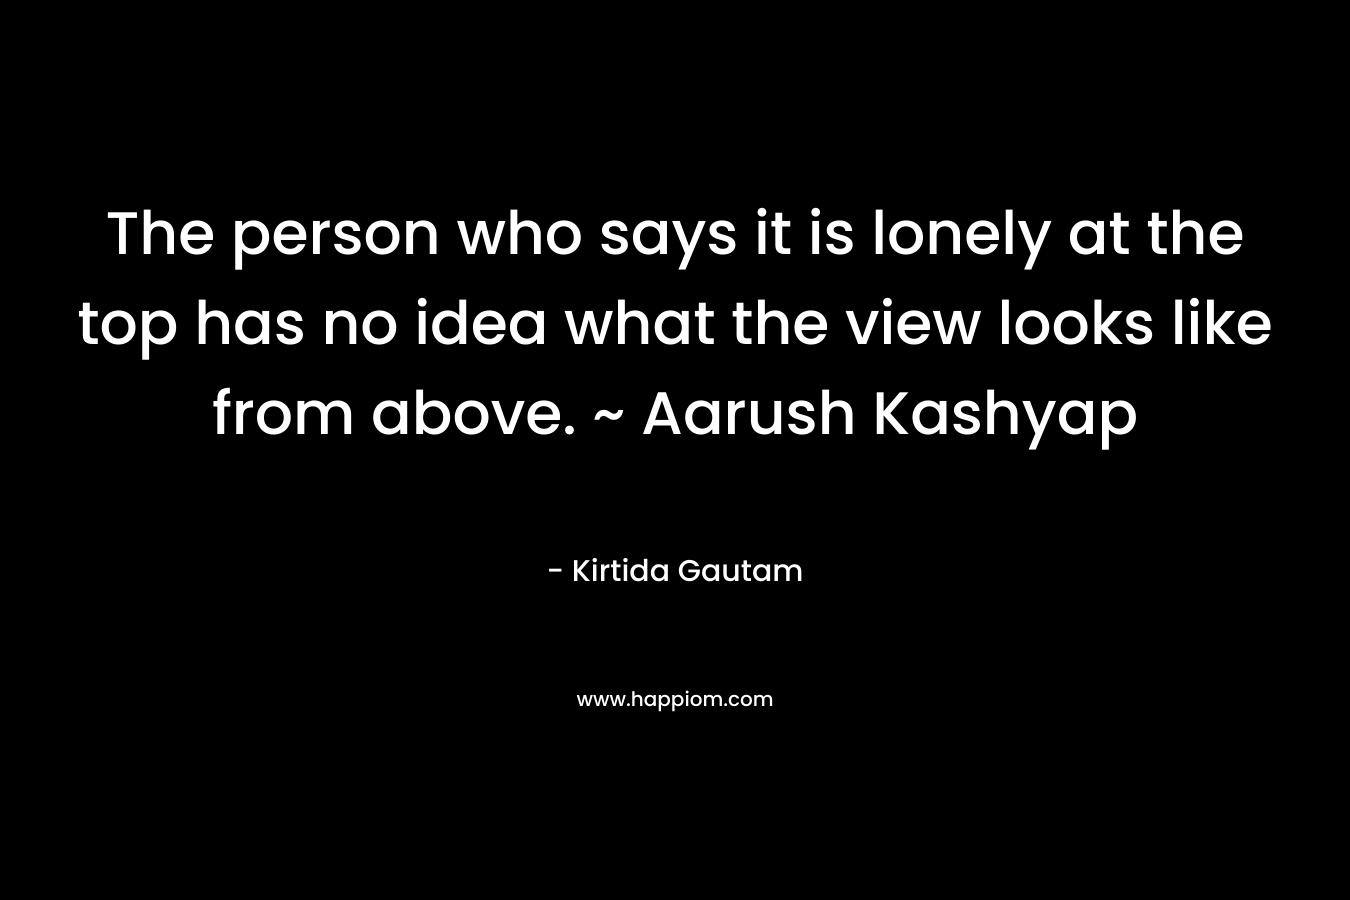 The person who says it is lonely at the top has no idea what the view looks like from above. ~ Aarush Kashyap